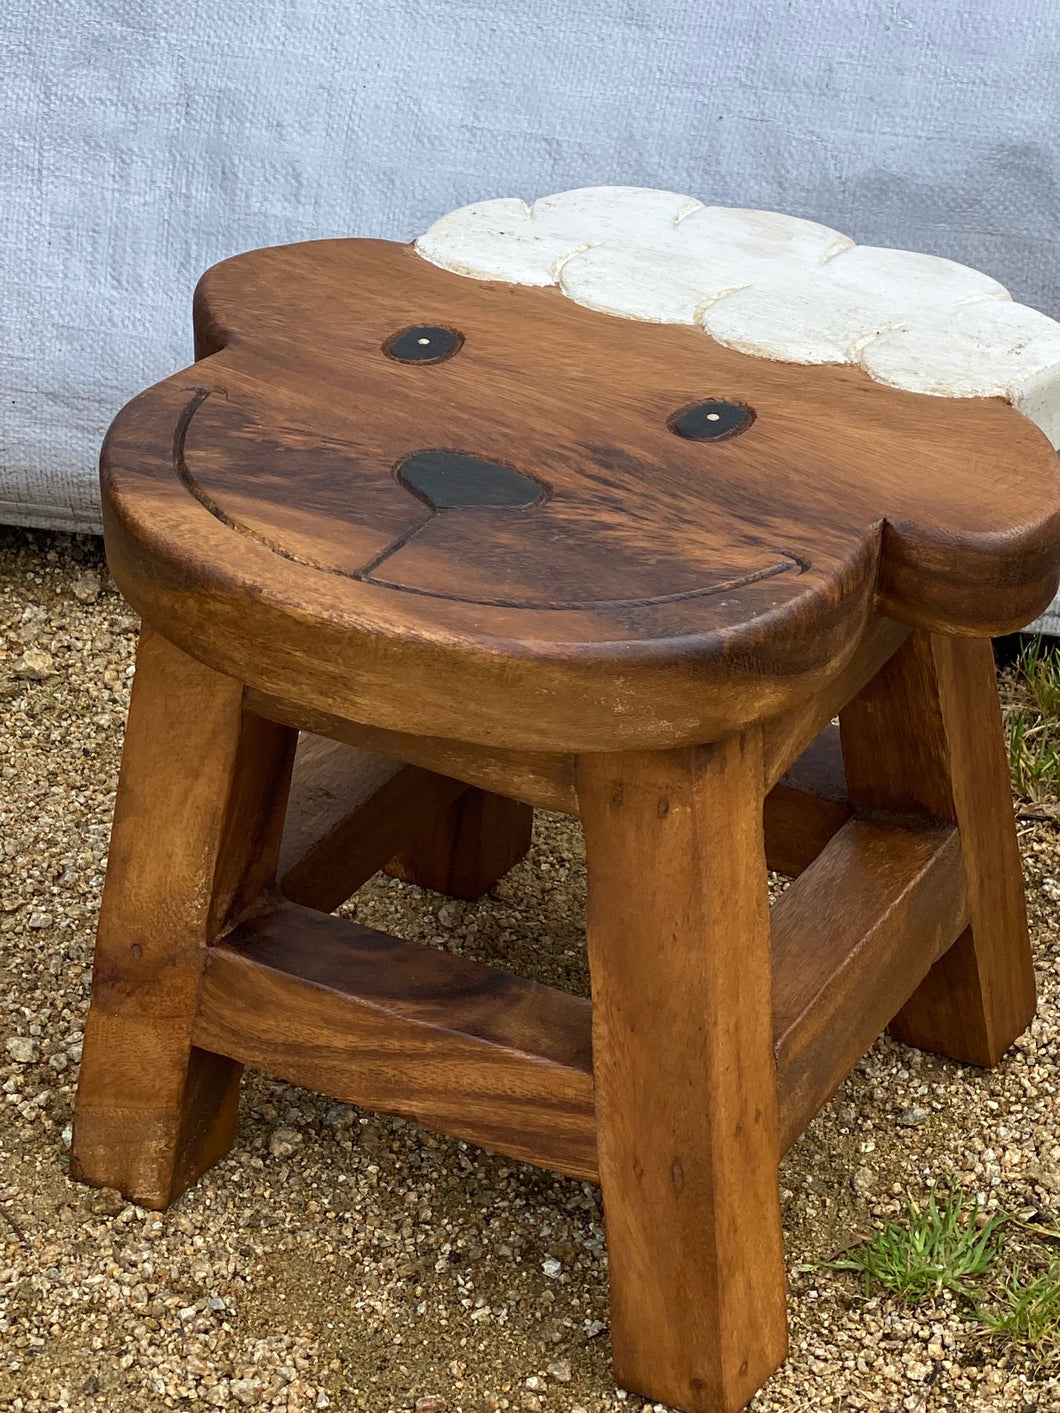 Kids furniture Wooden Stool SHEEP Themed Chair Toddlers Step sitting Stool